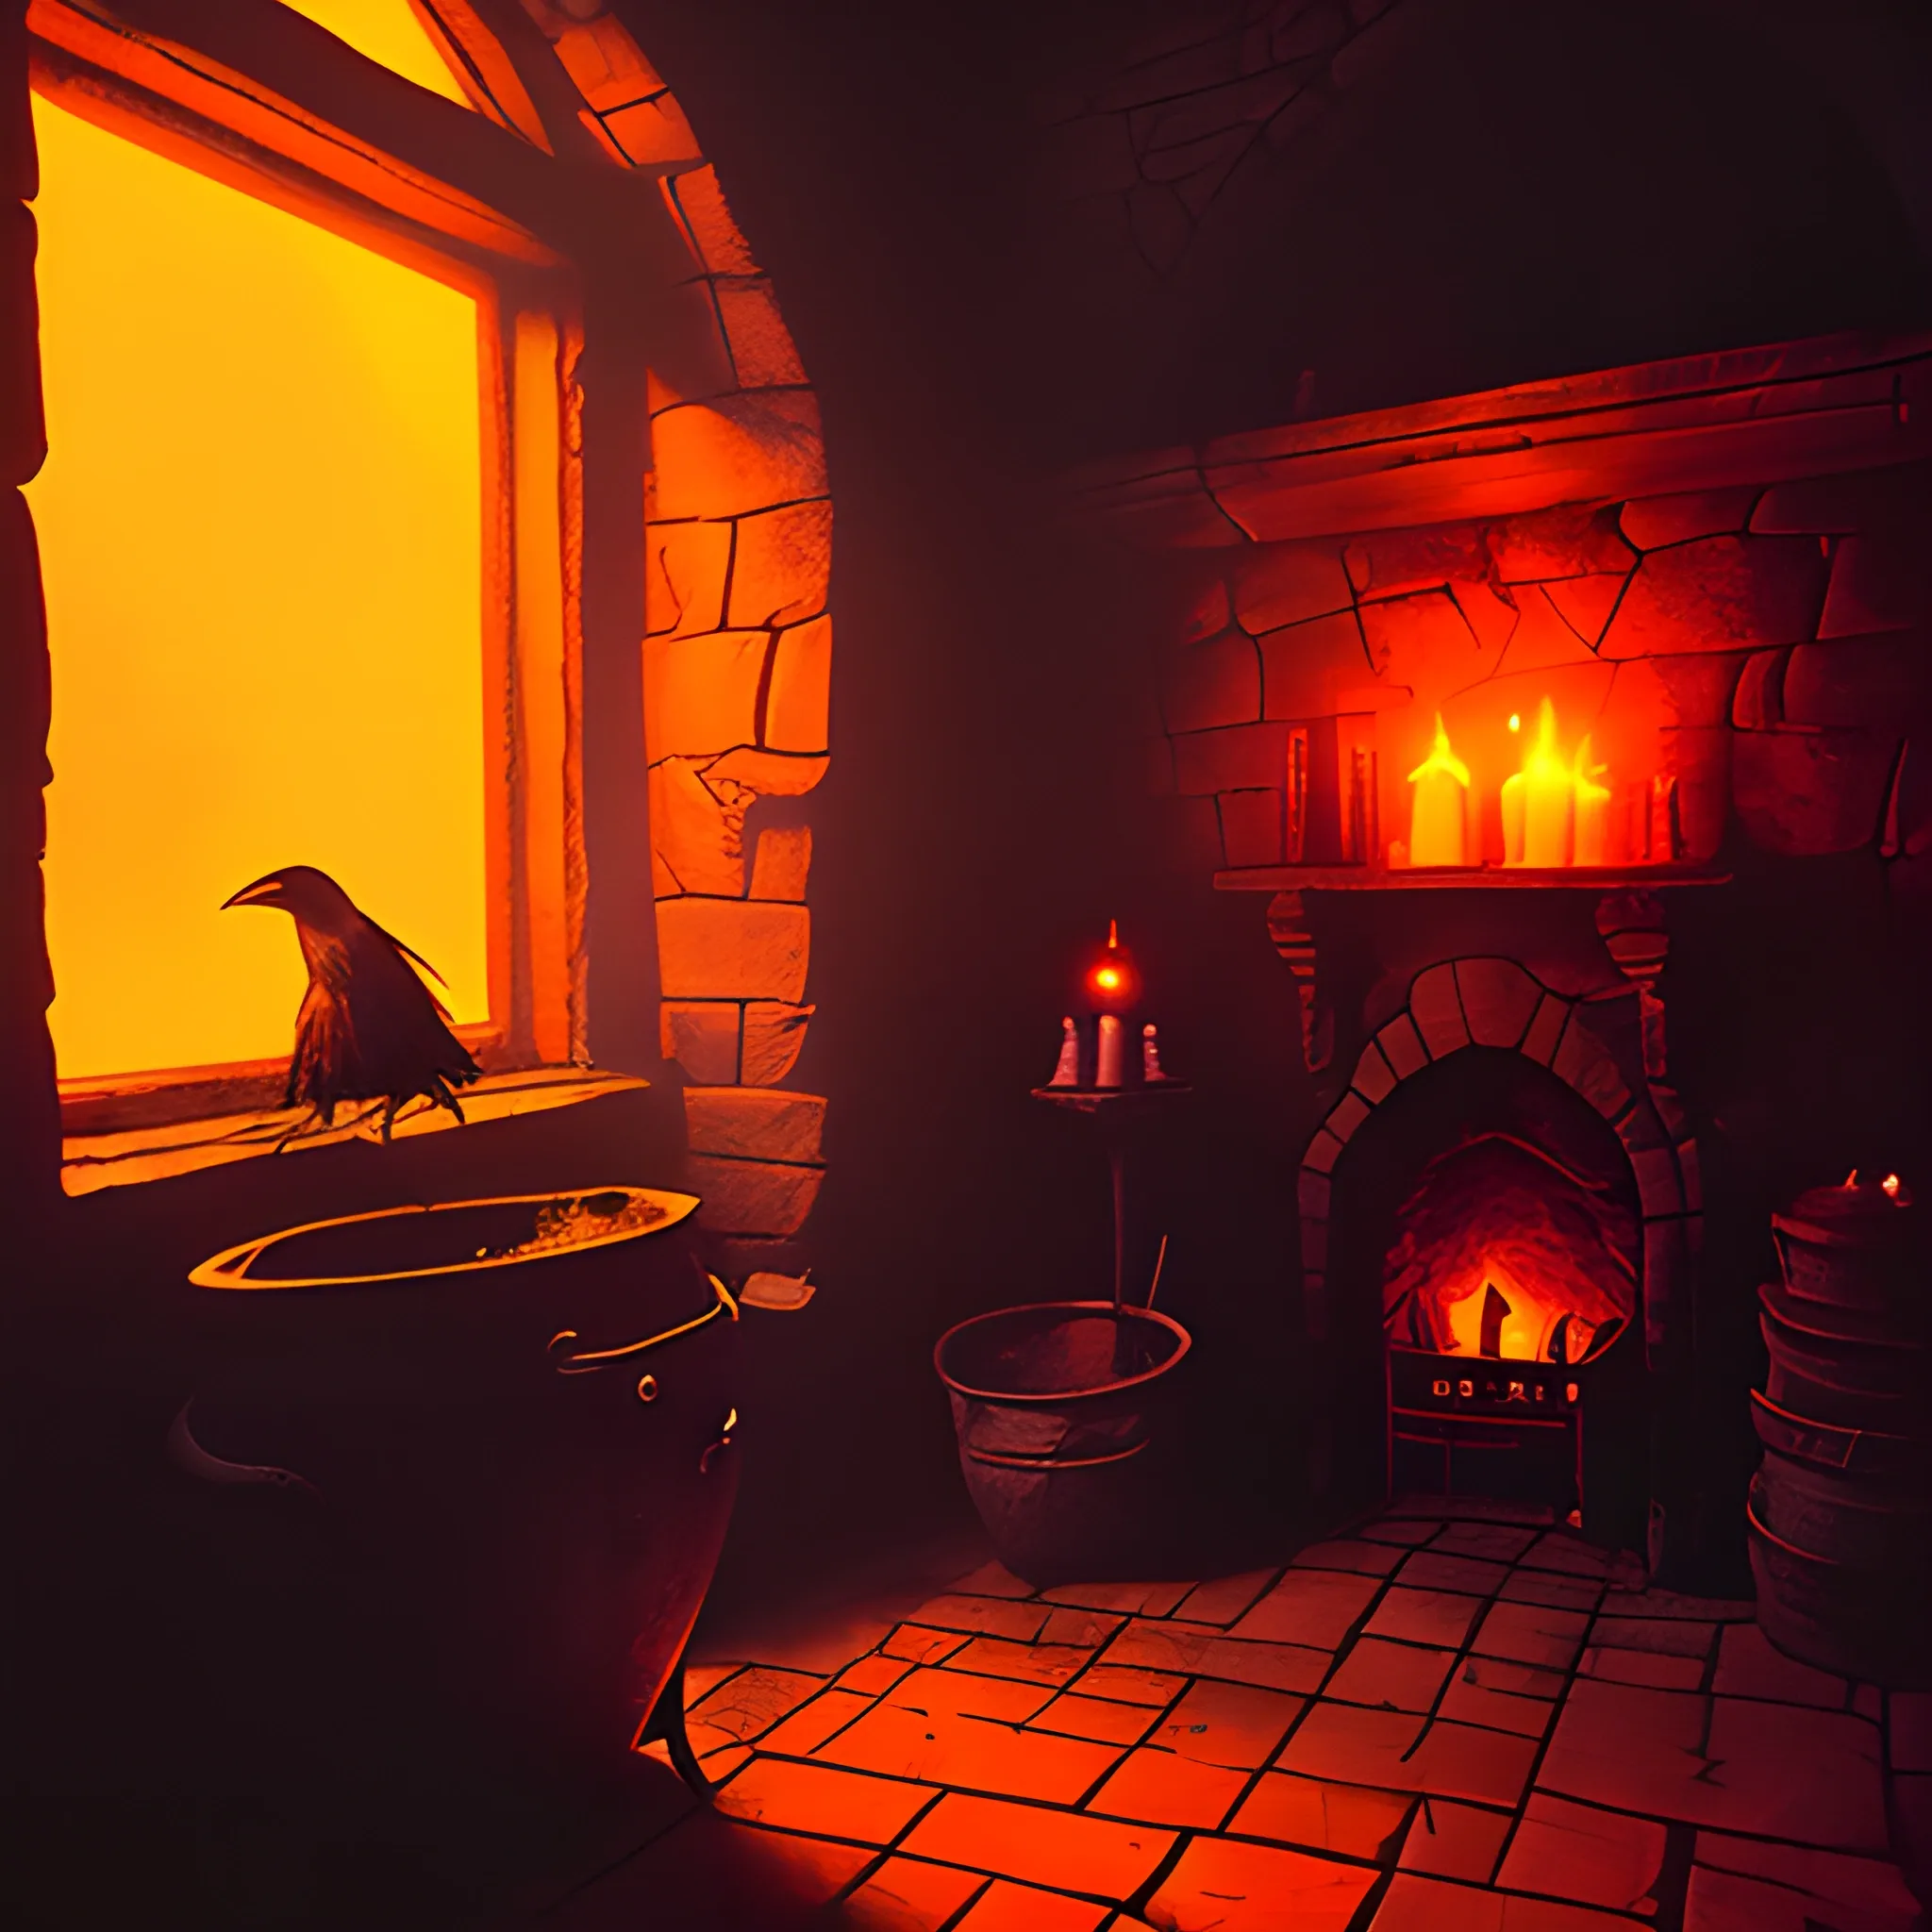 A group of witches gather at a smoky creepy-looking room around a boiling caldron. A dimmed red-orange colored light glows in the caldron. Walls made of cobbled stone. Spider web creeping around the corner of the room. A raven is standing on the window.